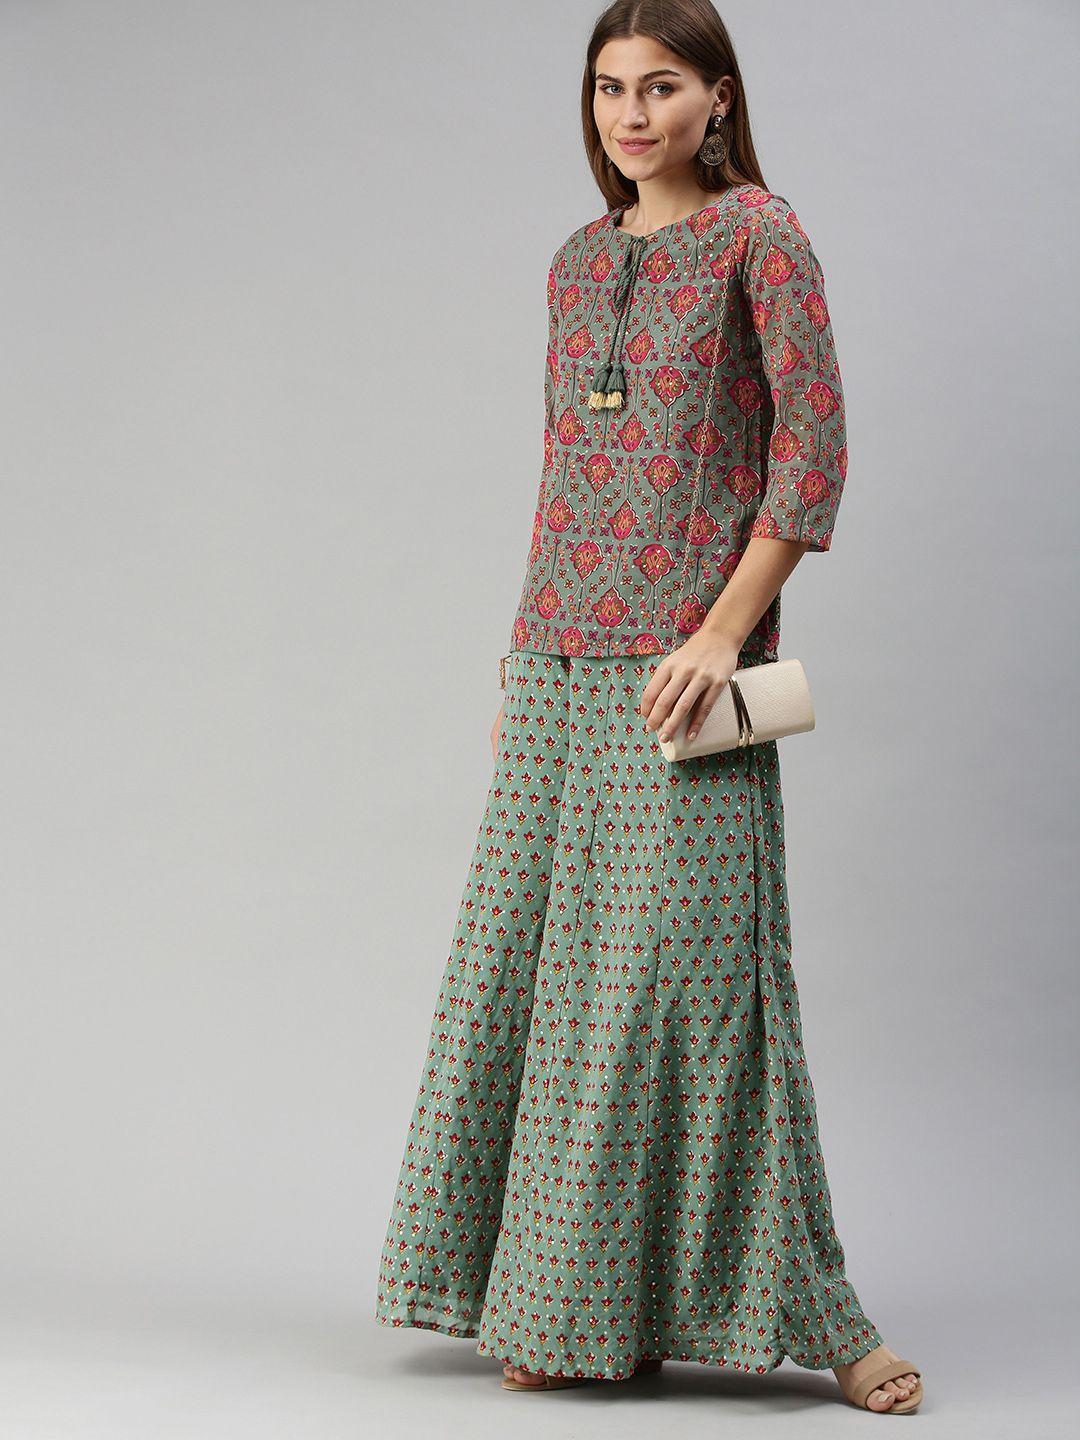 global desi teal green & red printed two-piece